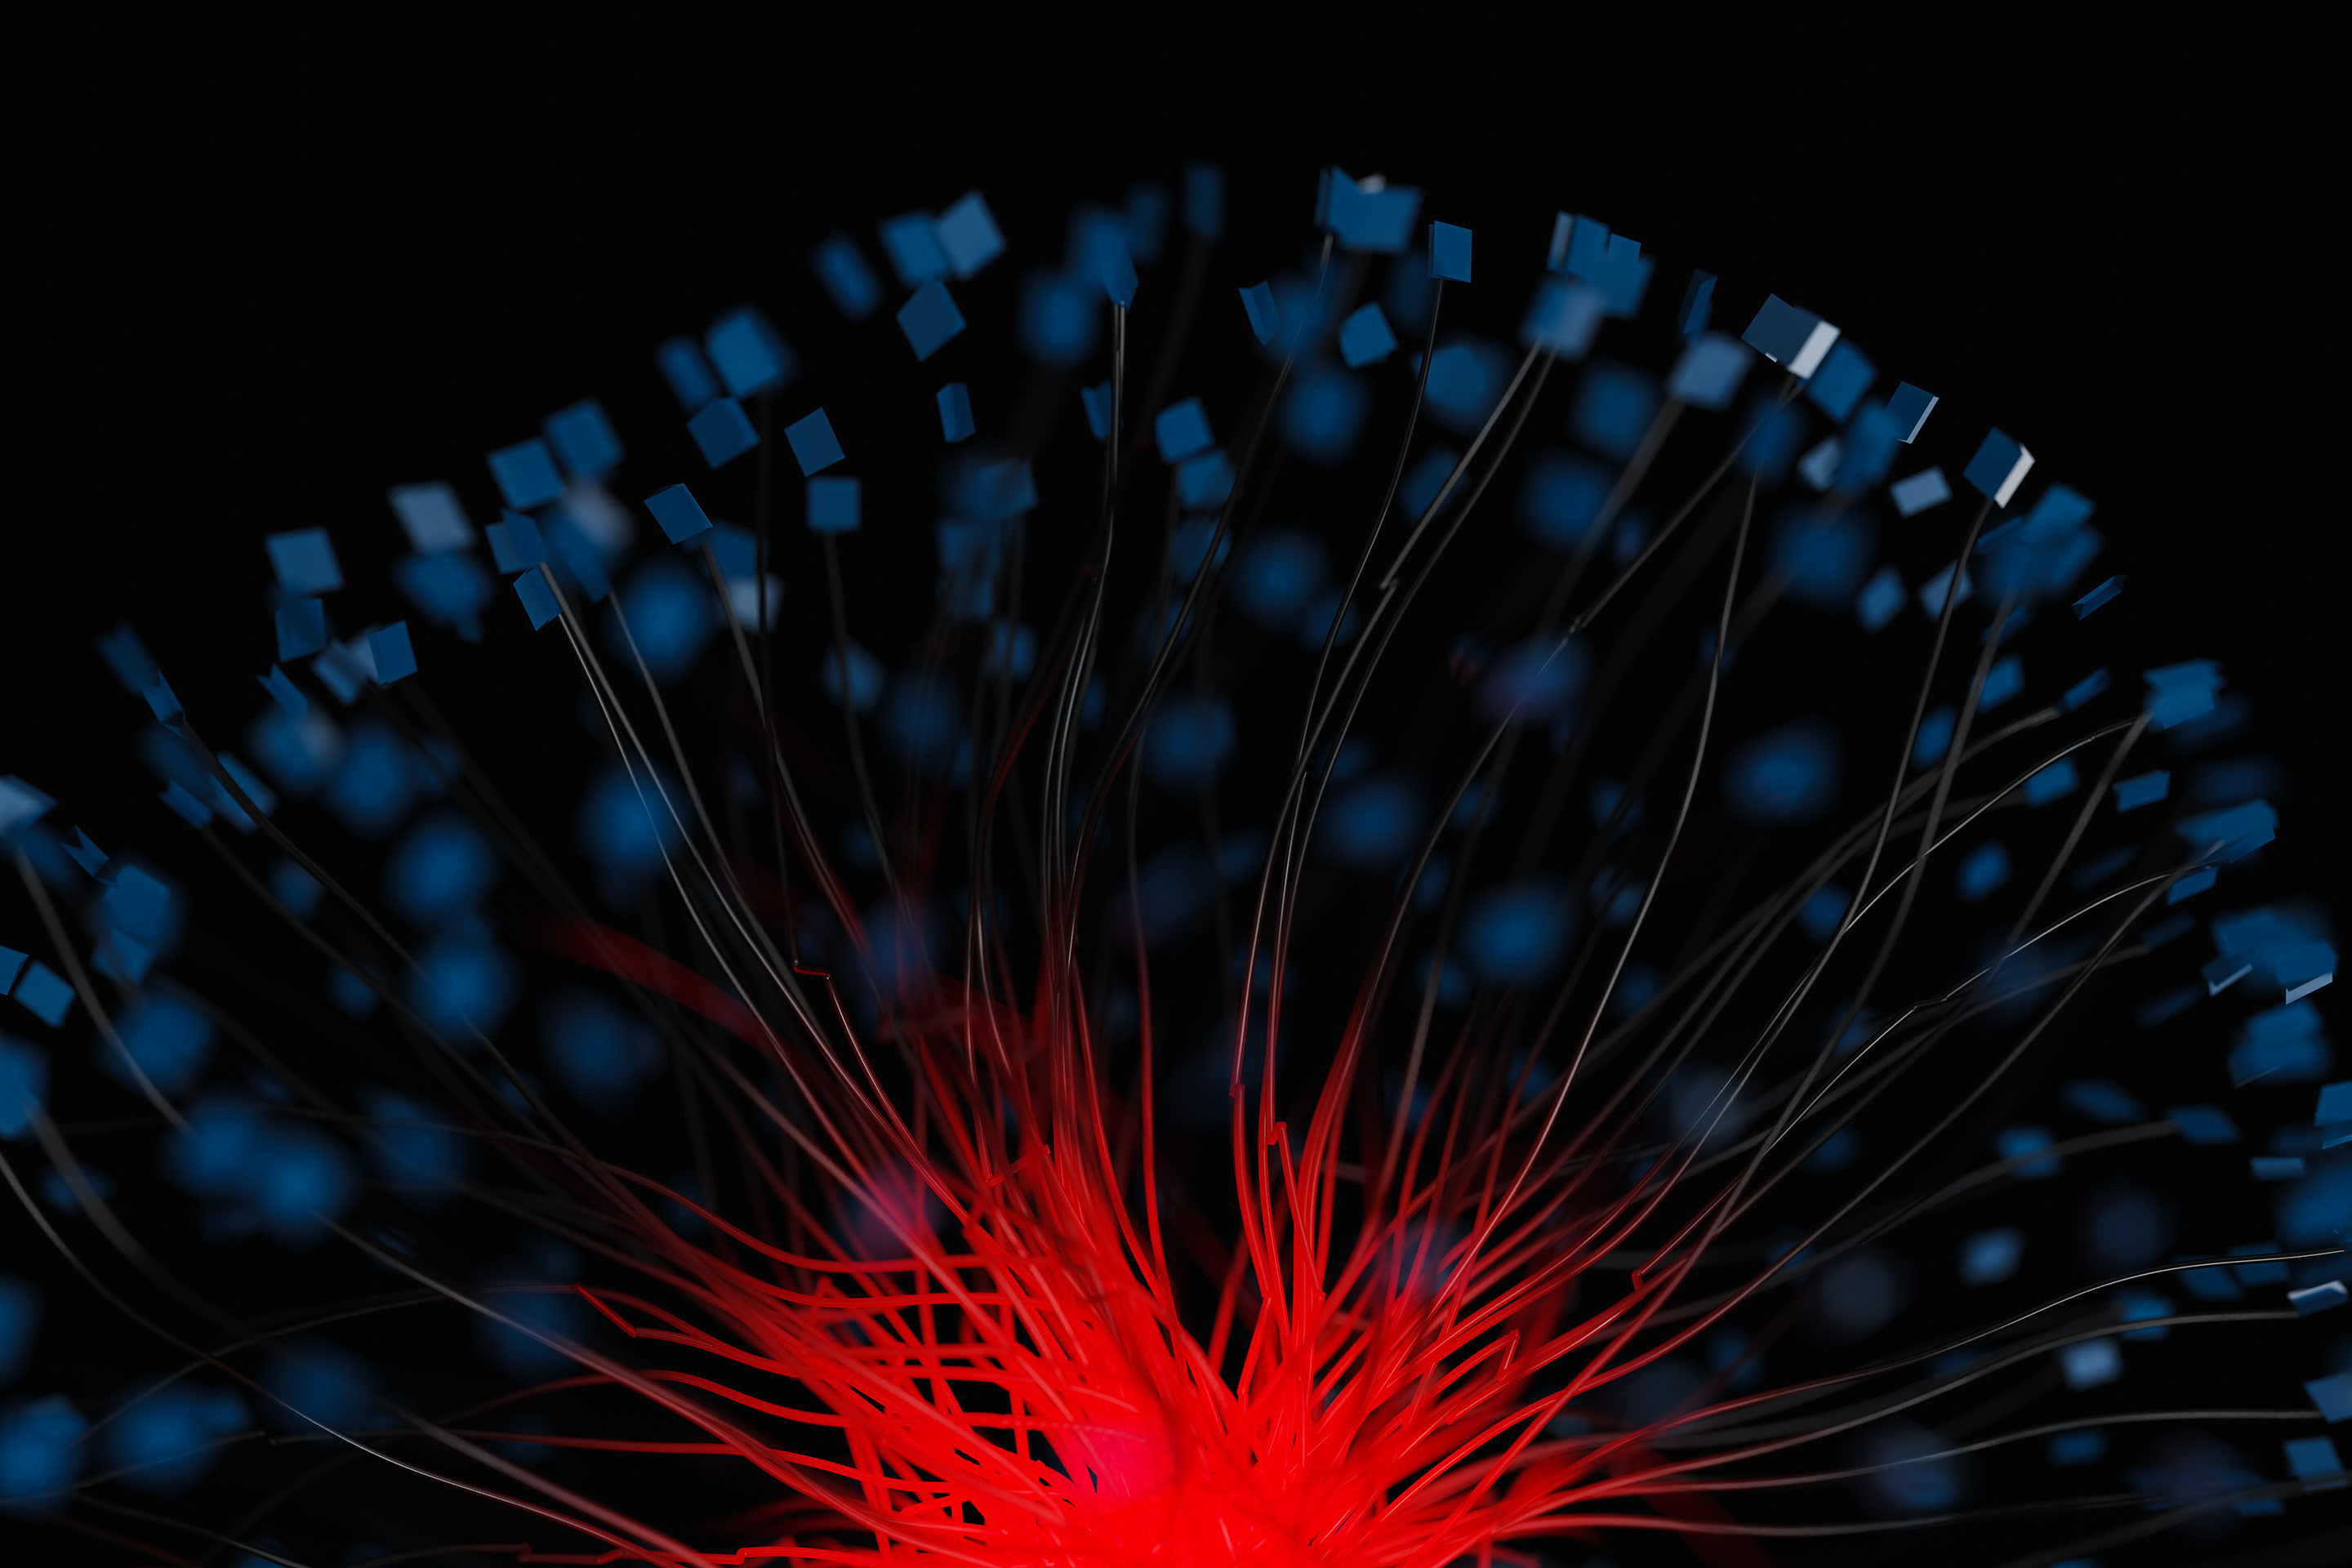 A powerfully bold image shows dozens of fire-red optic fibers stretching upward from a central point, energizing and lifting cold, blue, cubical components suspended against a dark background.